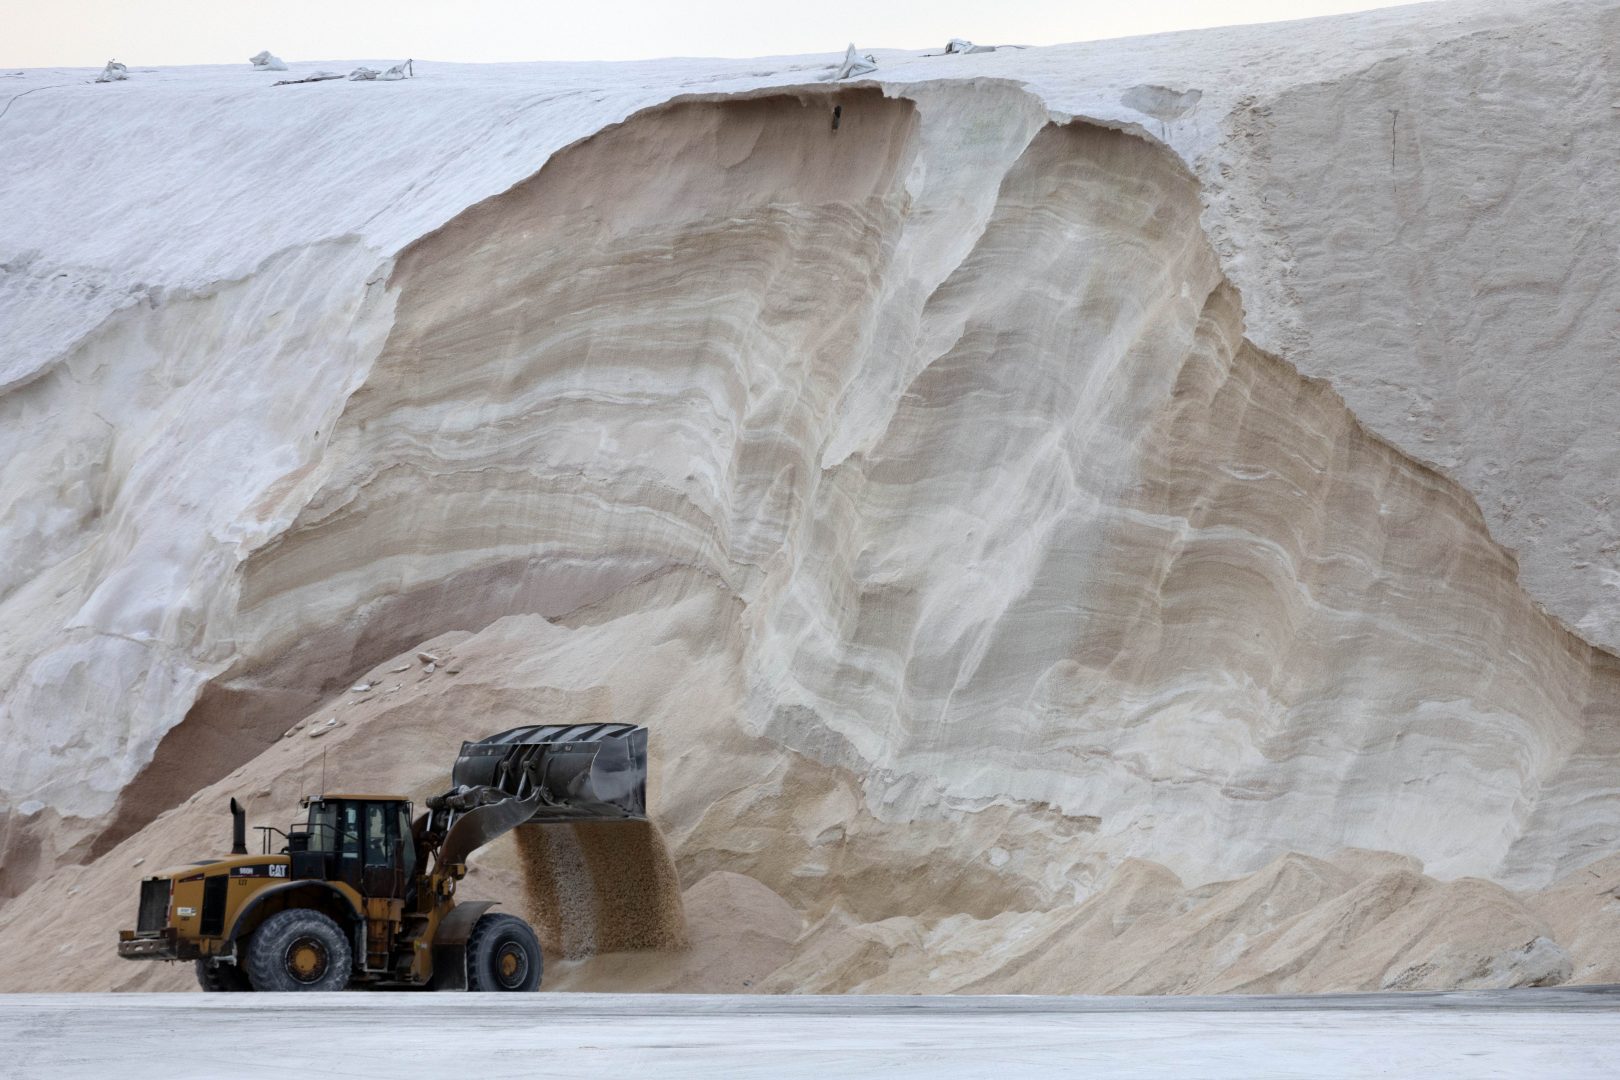 A front-end loader works in front of a pile of road salt, Friday, Jan. 28, 2022, in Chelsea, Mass. Residents and officials in the Northeast and mid-Atlantic regions of the U.S. are bracing for a powerful winter storm expected to produce blizzard conditions Friday and Saturday. (AP Photo/Michael Dwyer)